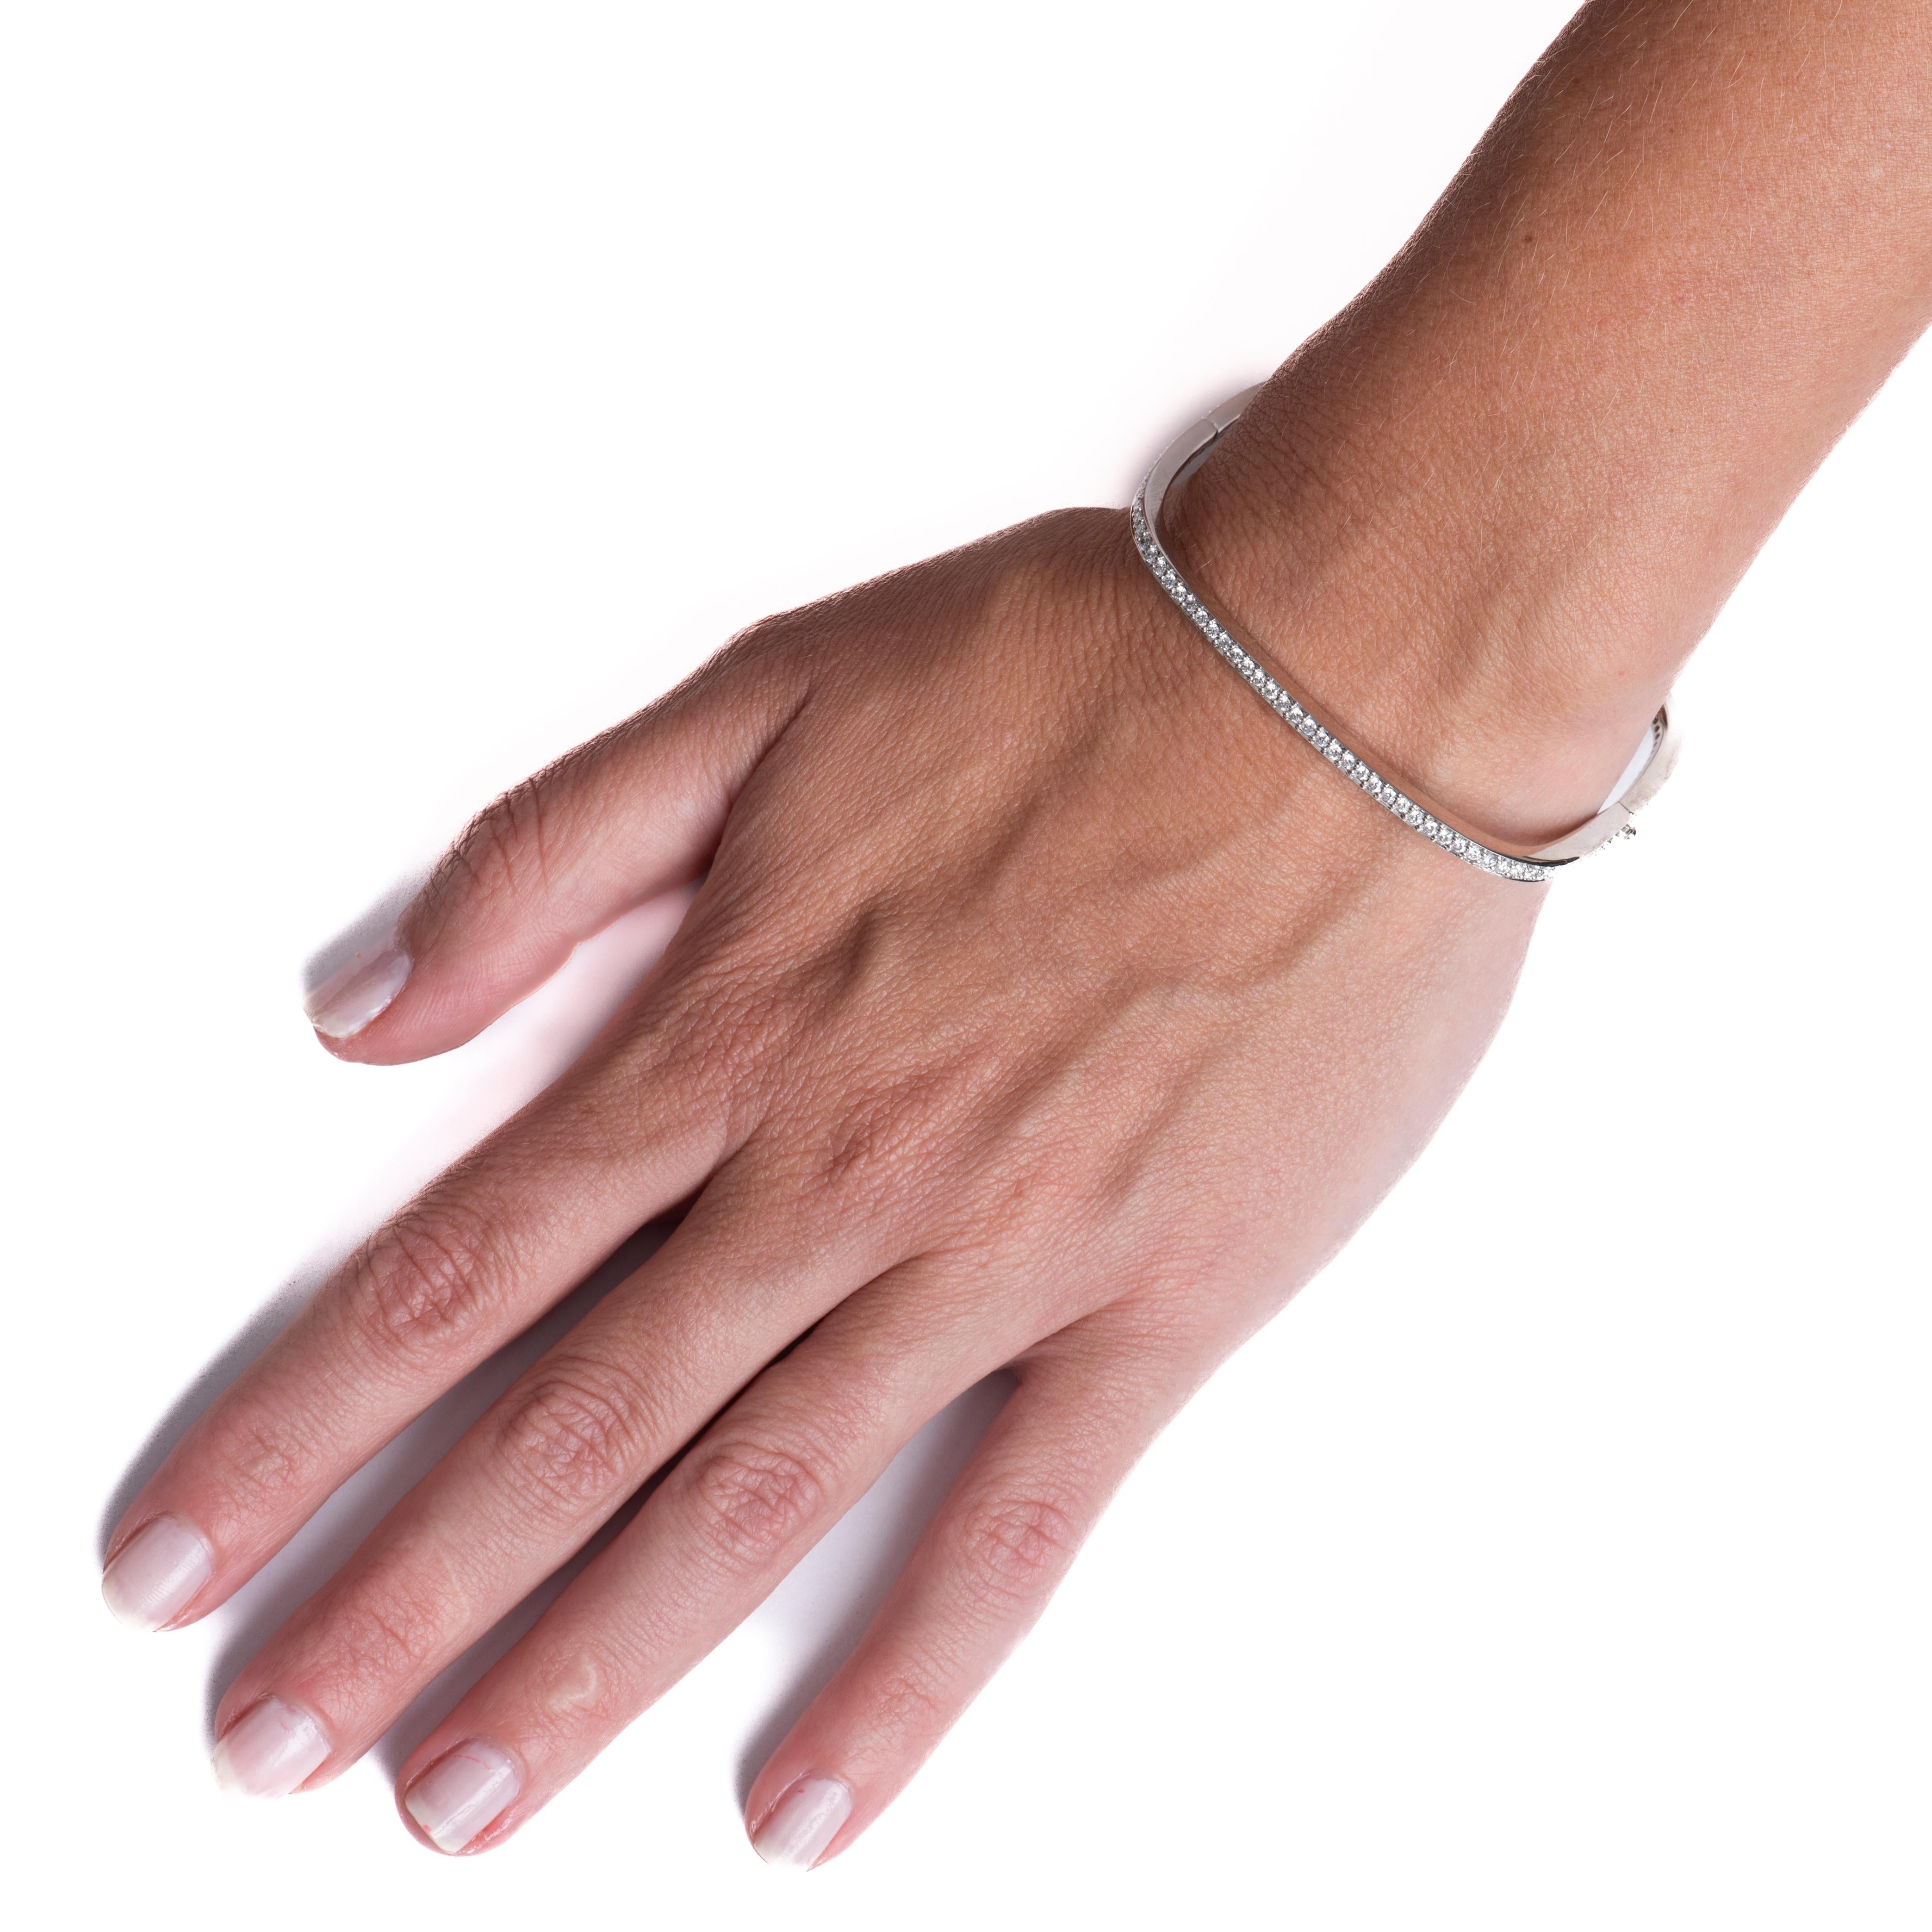 This square shaped bangle features 2.10 carat total weight in round brilliant cut natural diamonds set in 18 karat white gold. Wear alone or layer with your other favorite bracelets for a unique look. 
Measurements: Outer circumference approximately